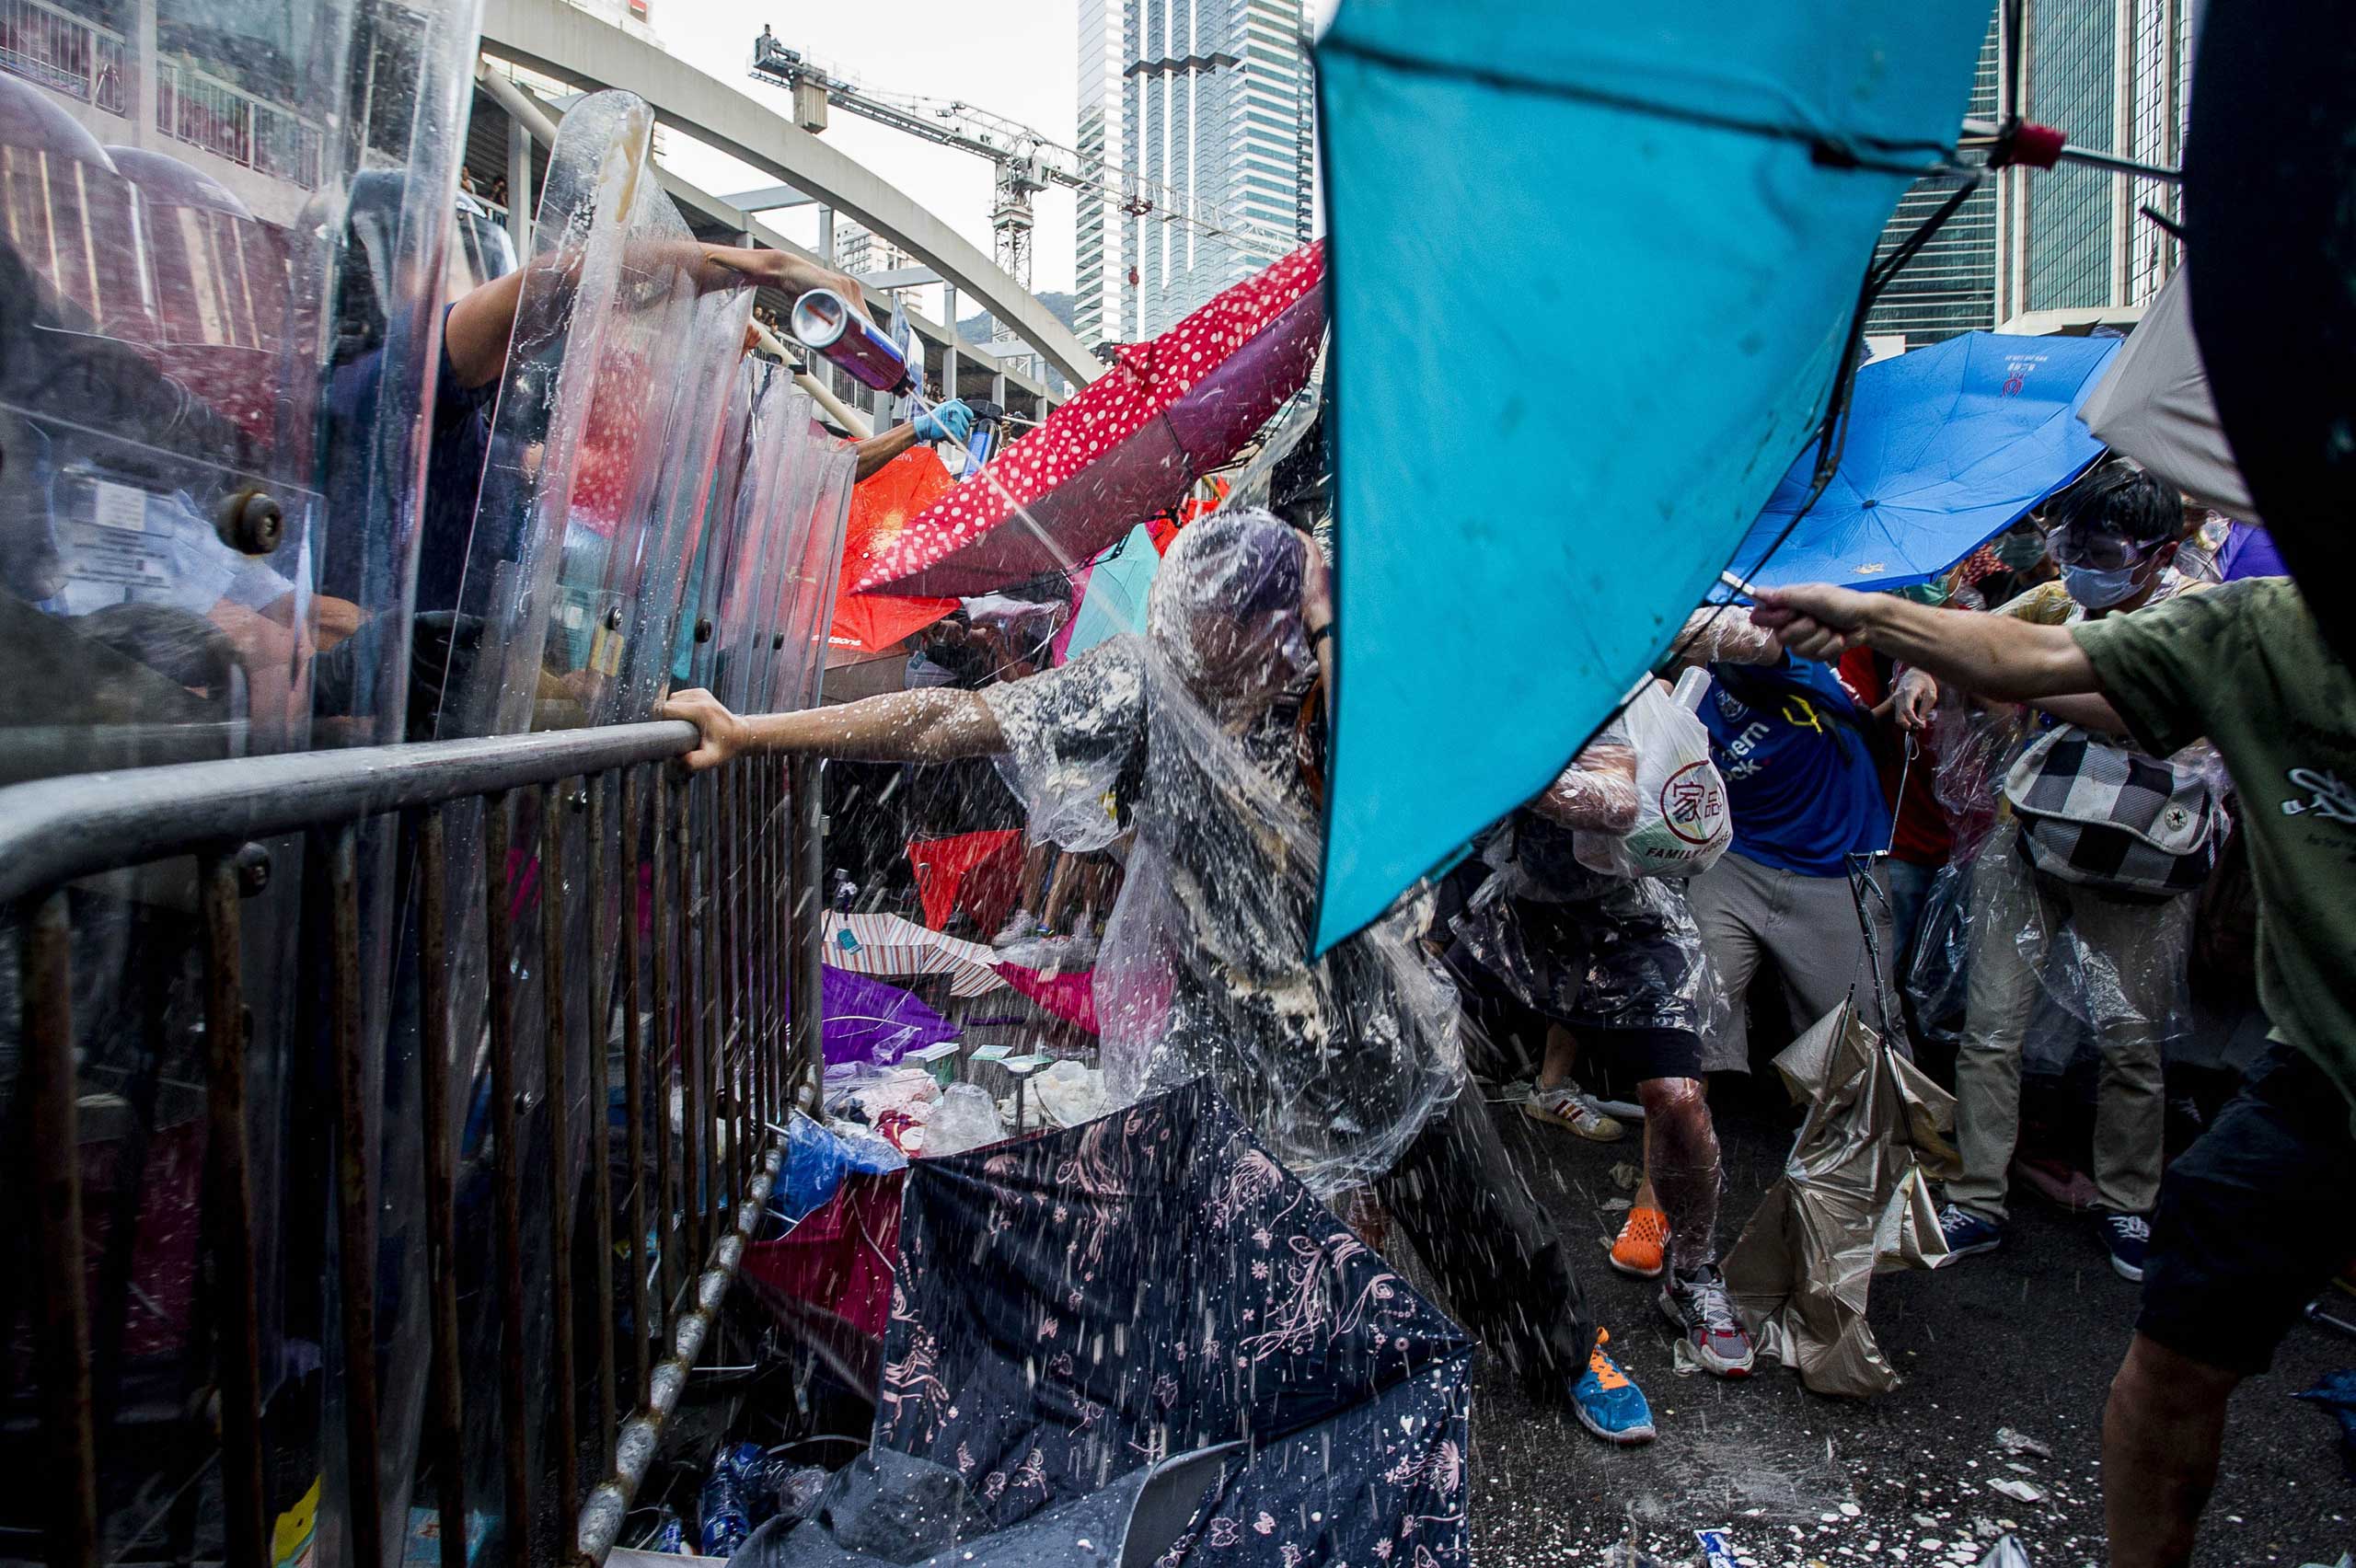 Pro-democracy demonstrators are sprayed with pepper spray during clashes with police officers during a rally near the Hong Kong government headquarters on Sept. 28, 2014.